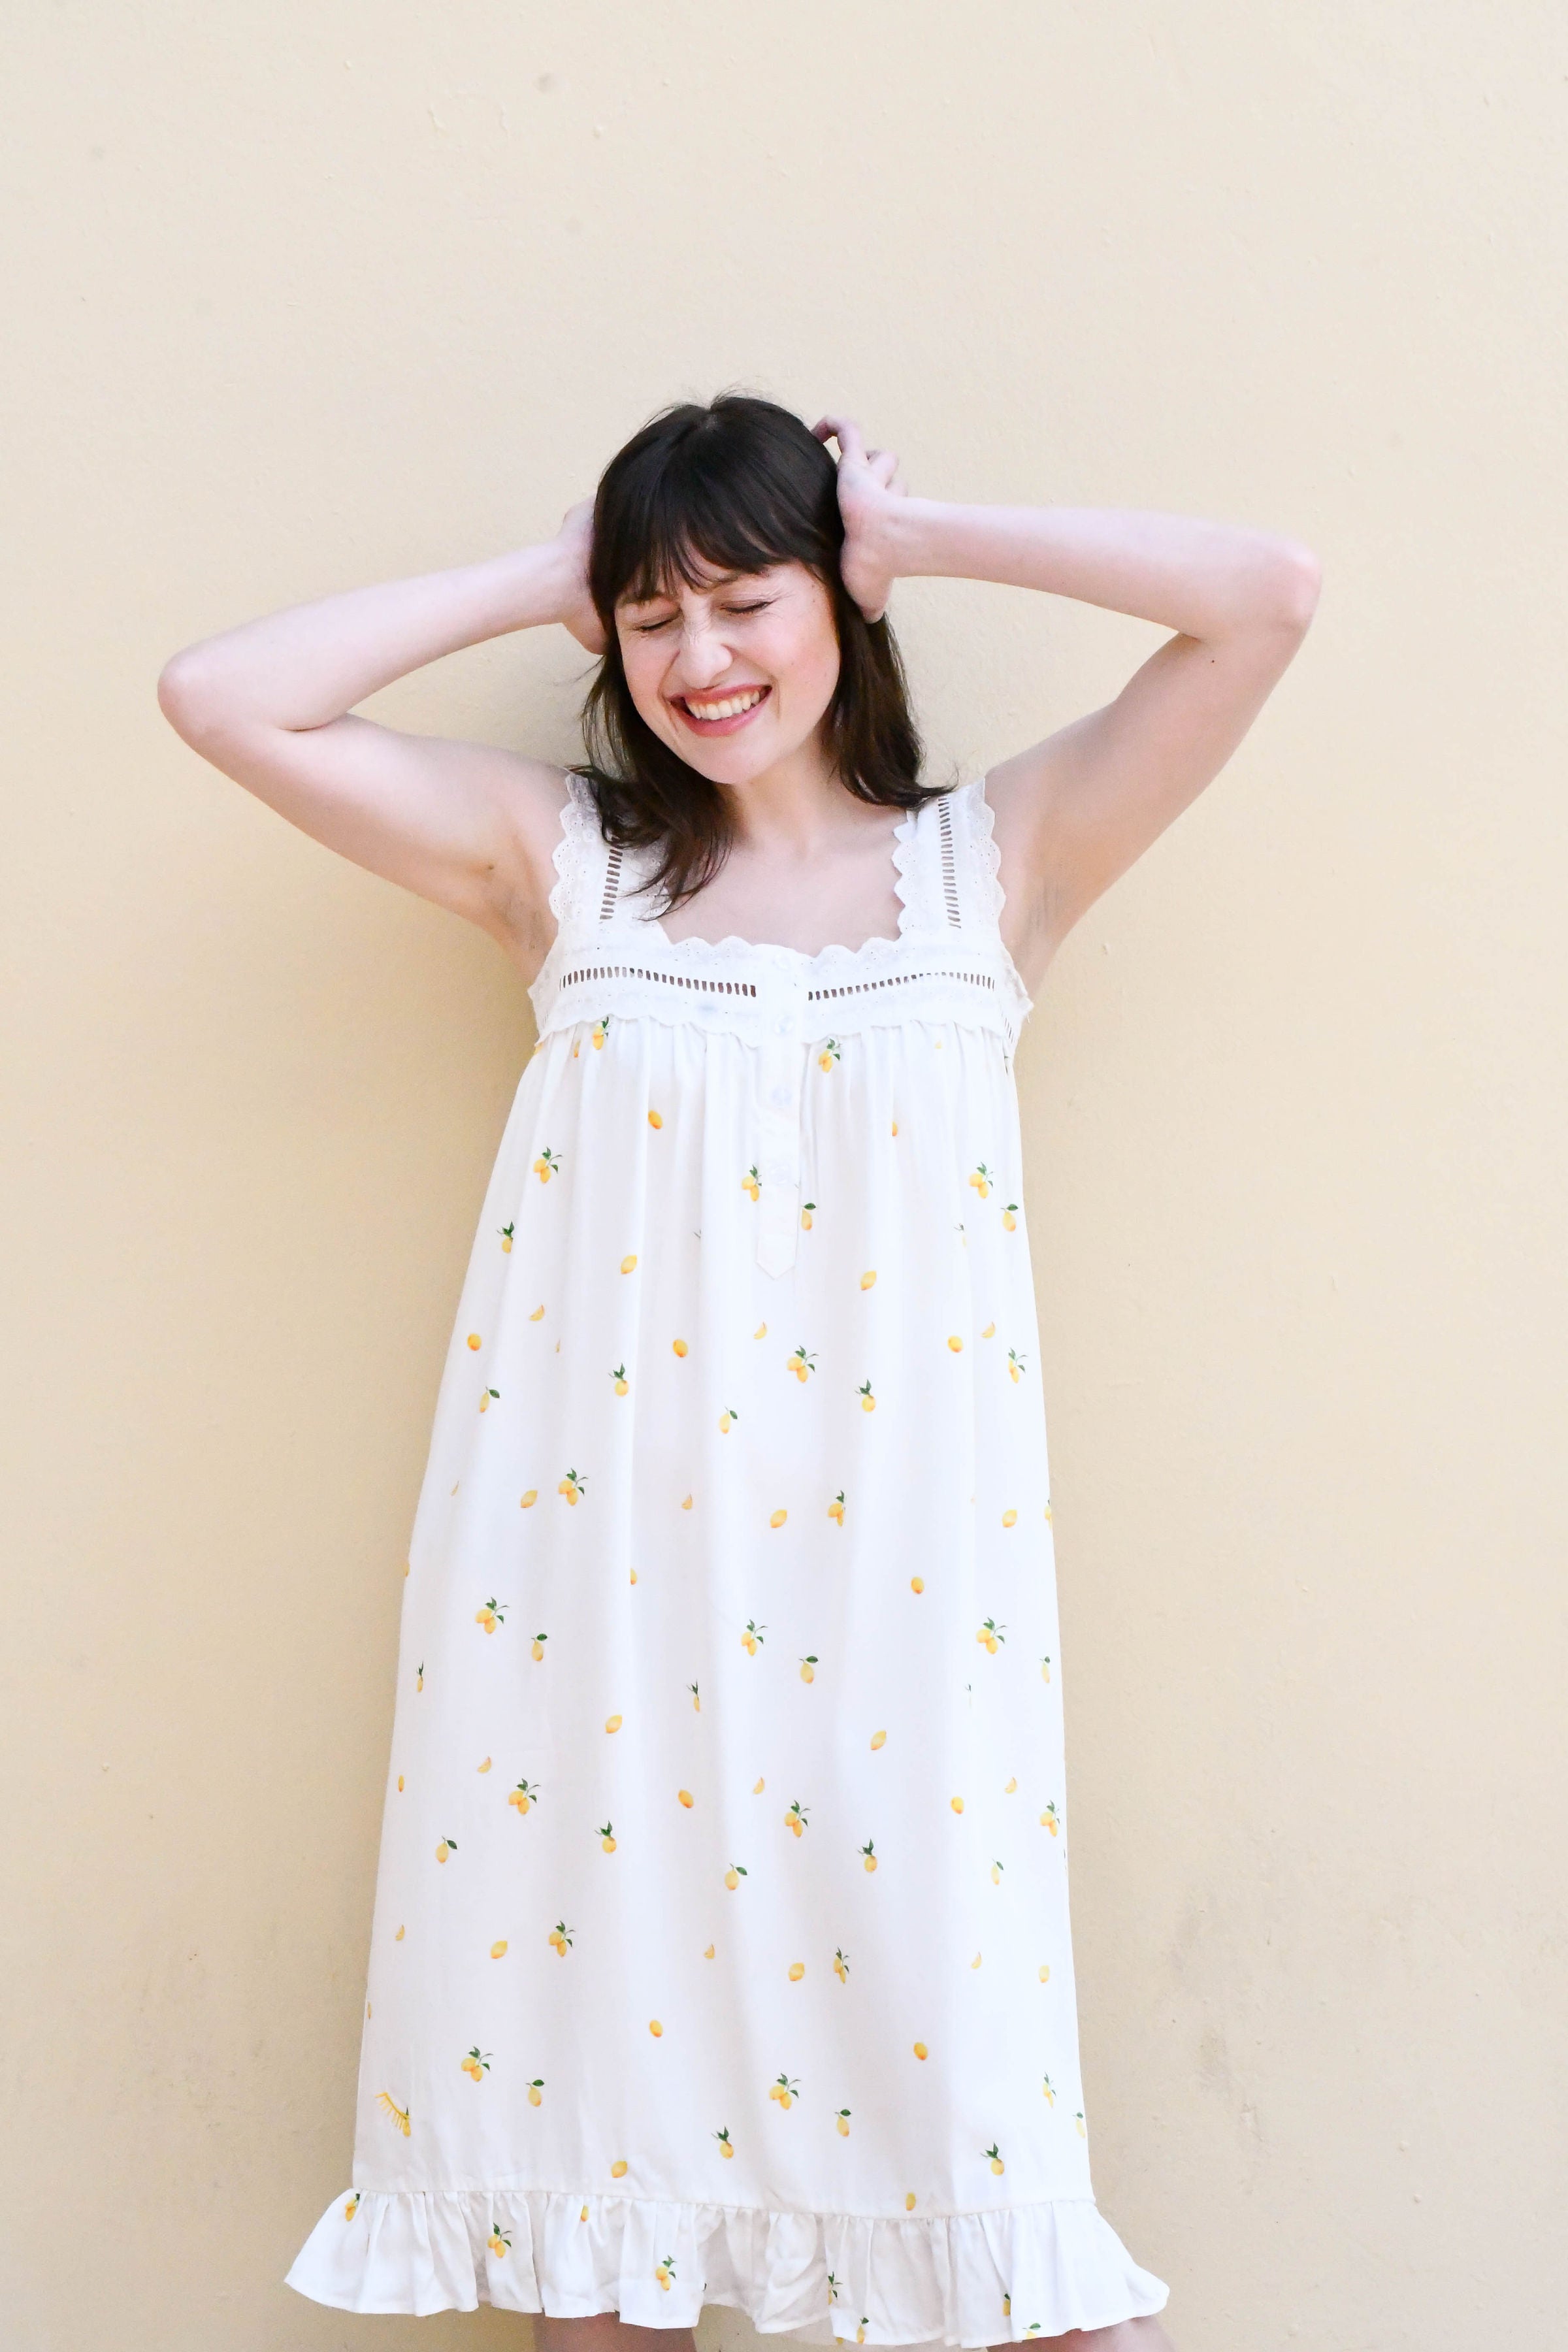 Summery citrus sleep dress for all ages women sizes XS to XL